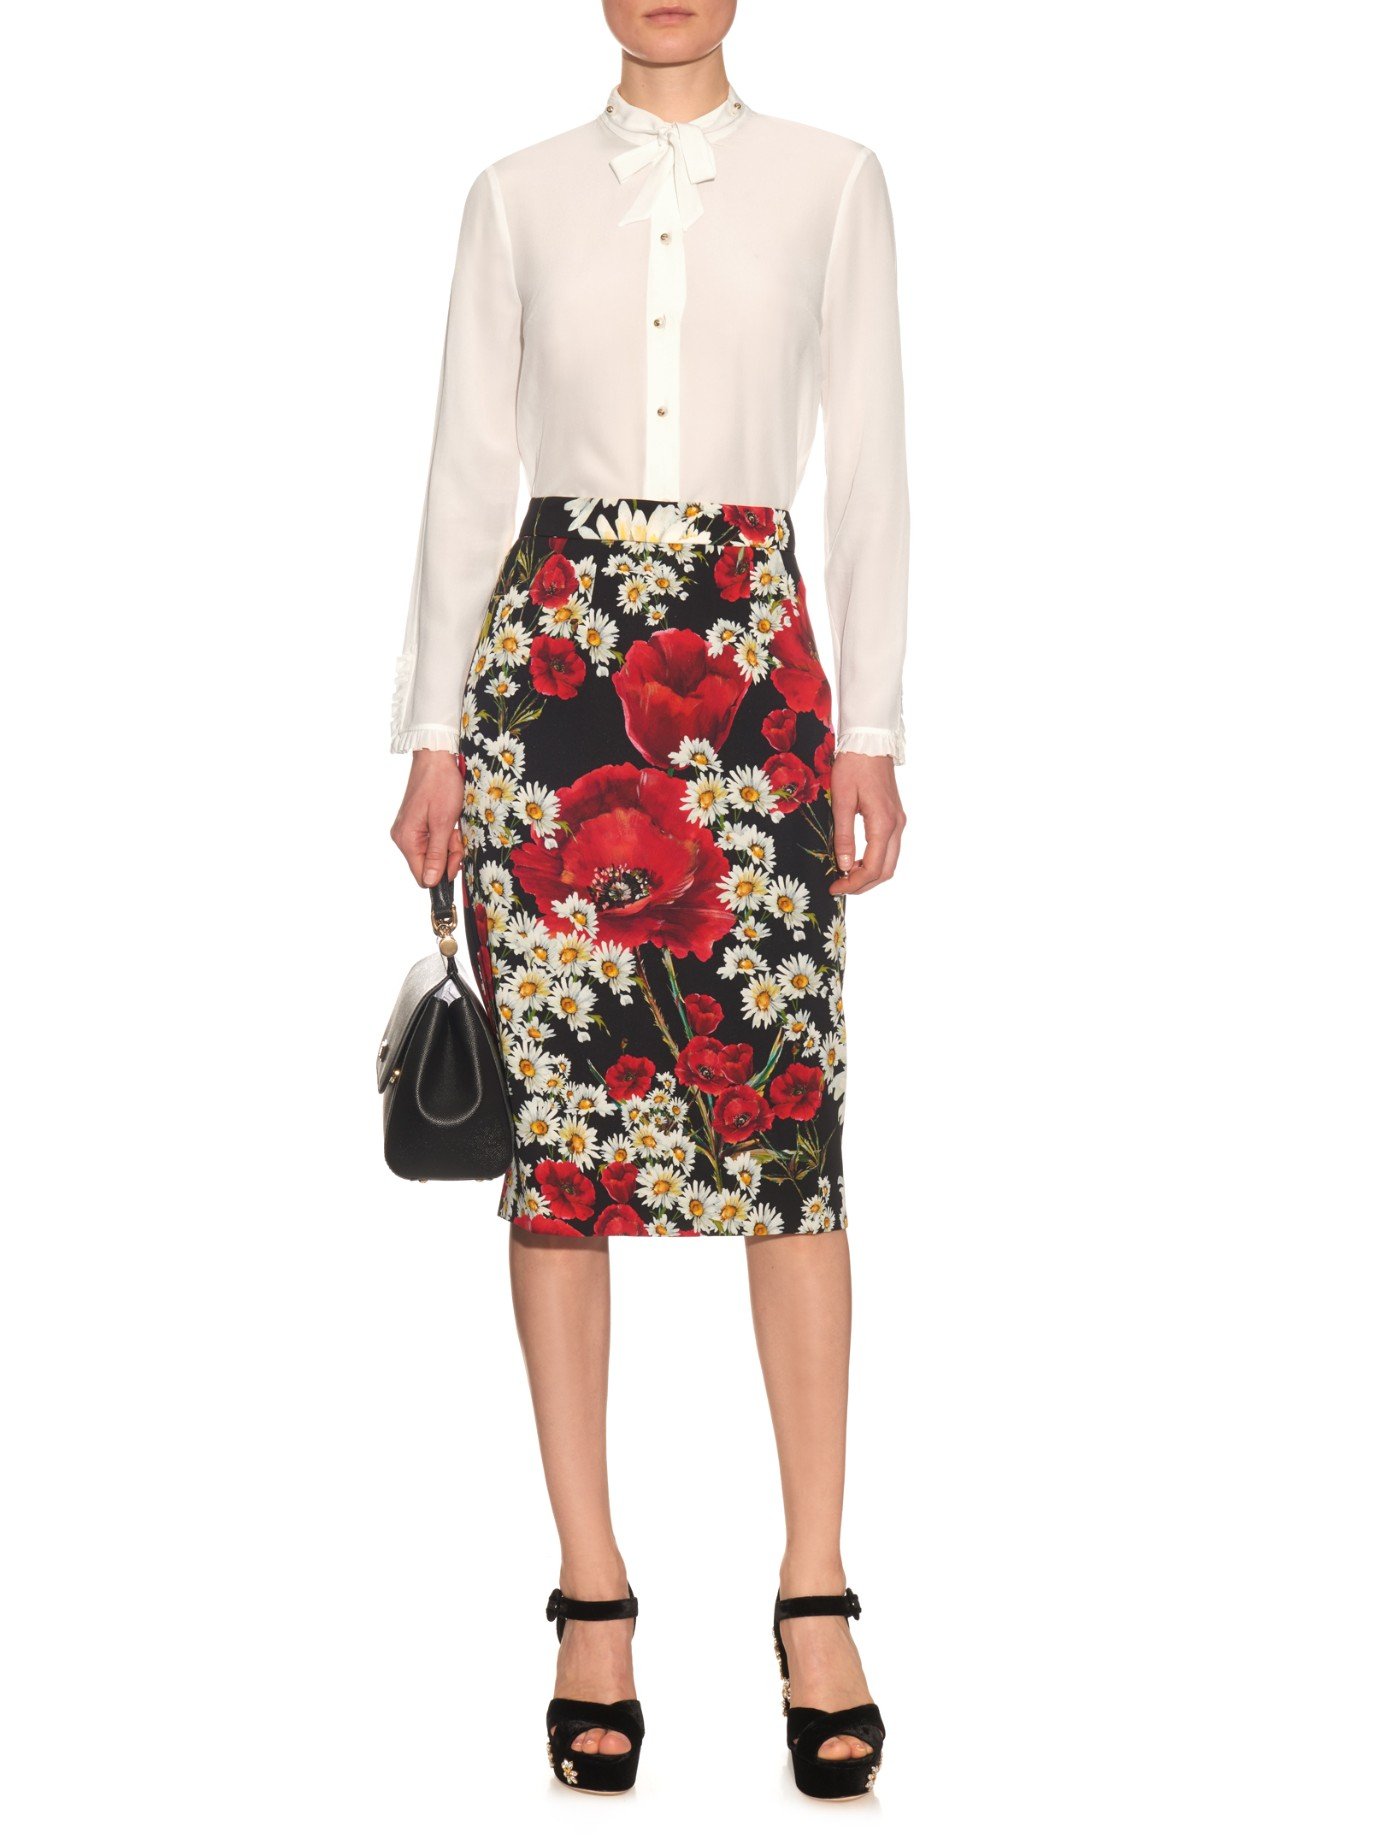 Lyst - Dolce & Gabbana Printed Skirt in Red